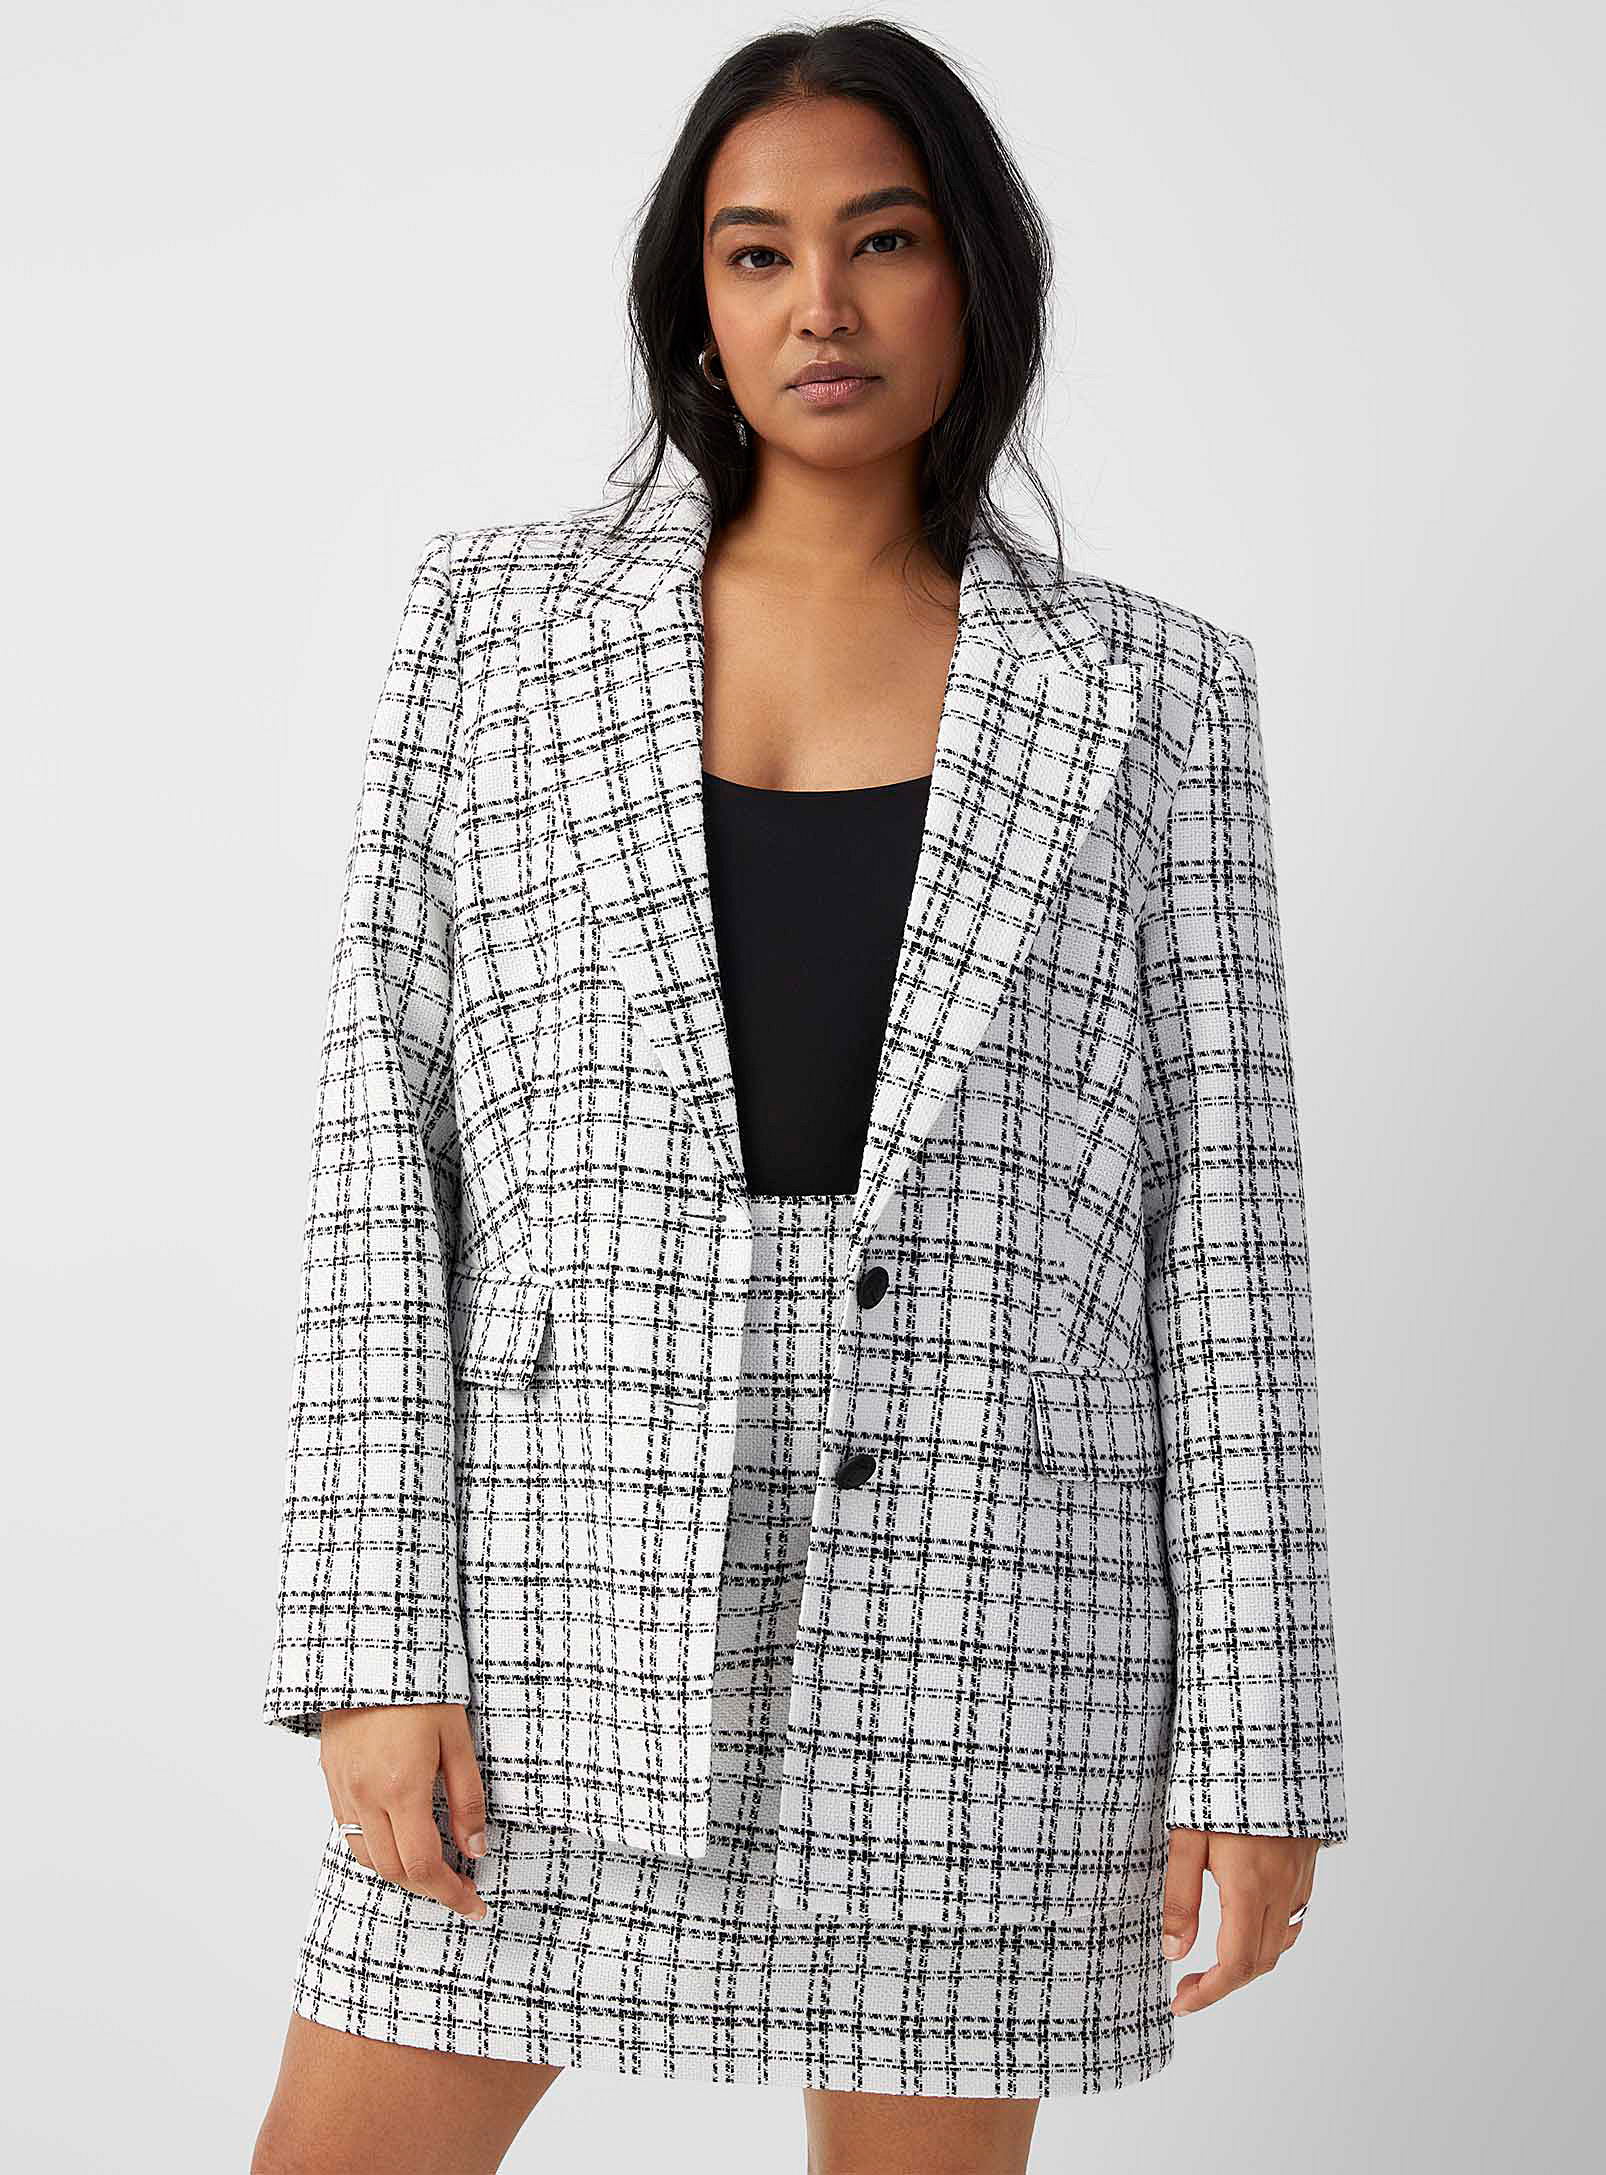 Contemporaine Black And White Plaid Tweed Skirt In Patterned White